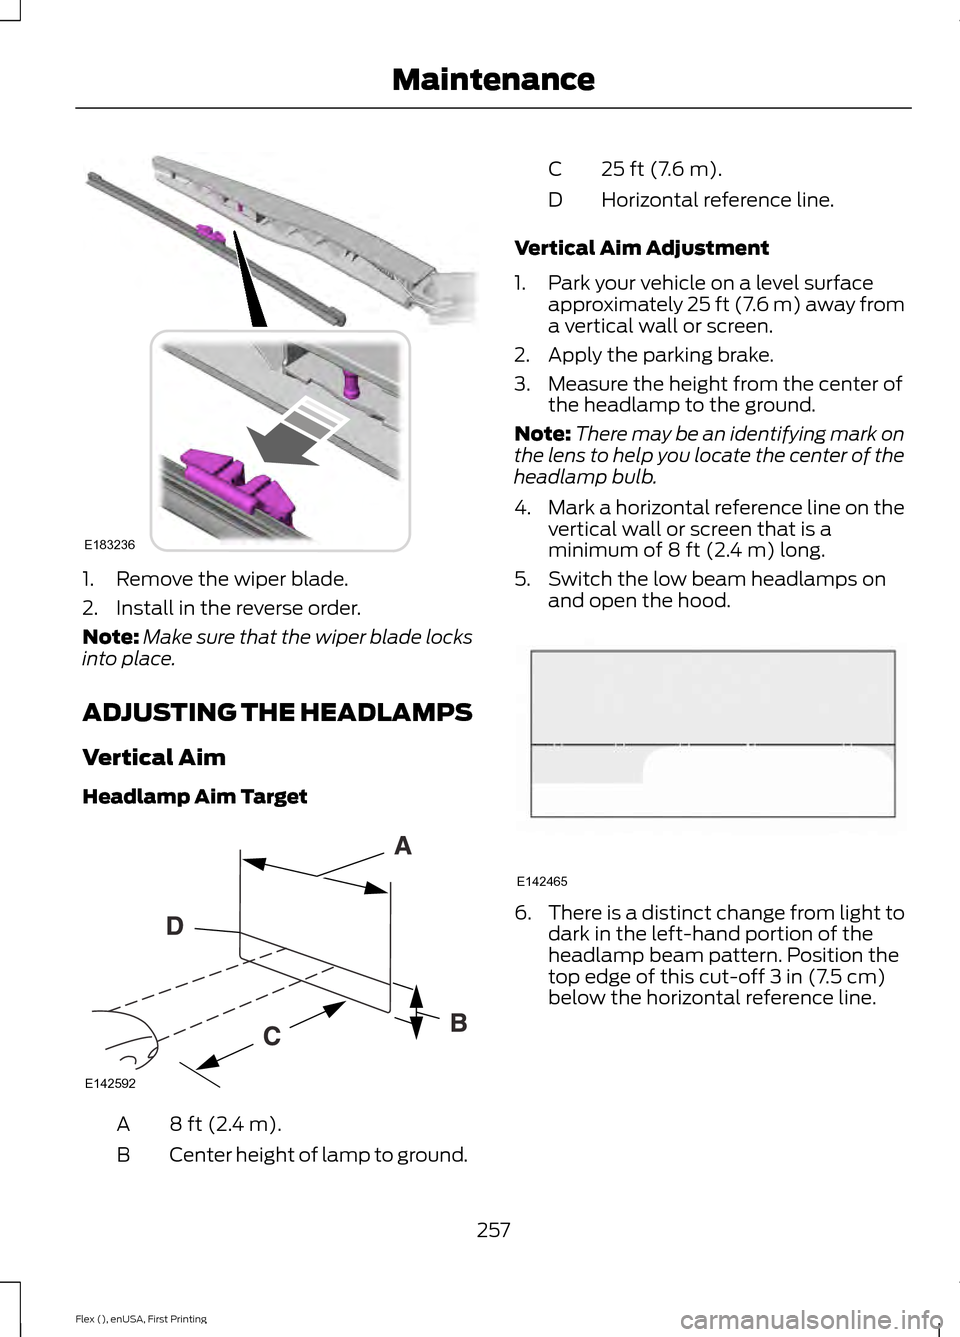 FORD FLEX 2016 1.G Owners Manual 1. Remove the wiper blade.
2. Install in the reverse order.
Note:
Make sure that the wiper blade locks
into place.
ADJUSTING THE HEADLAMPS
Vertical Aim
Headlamp Aim Target 8 ft (2.4 m).
A
Center heigh